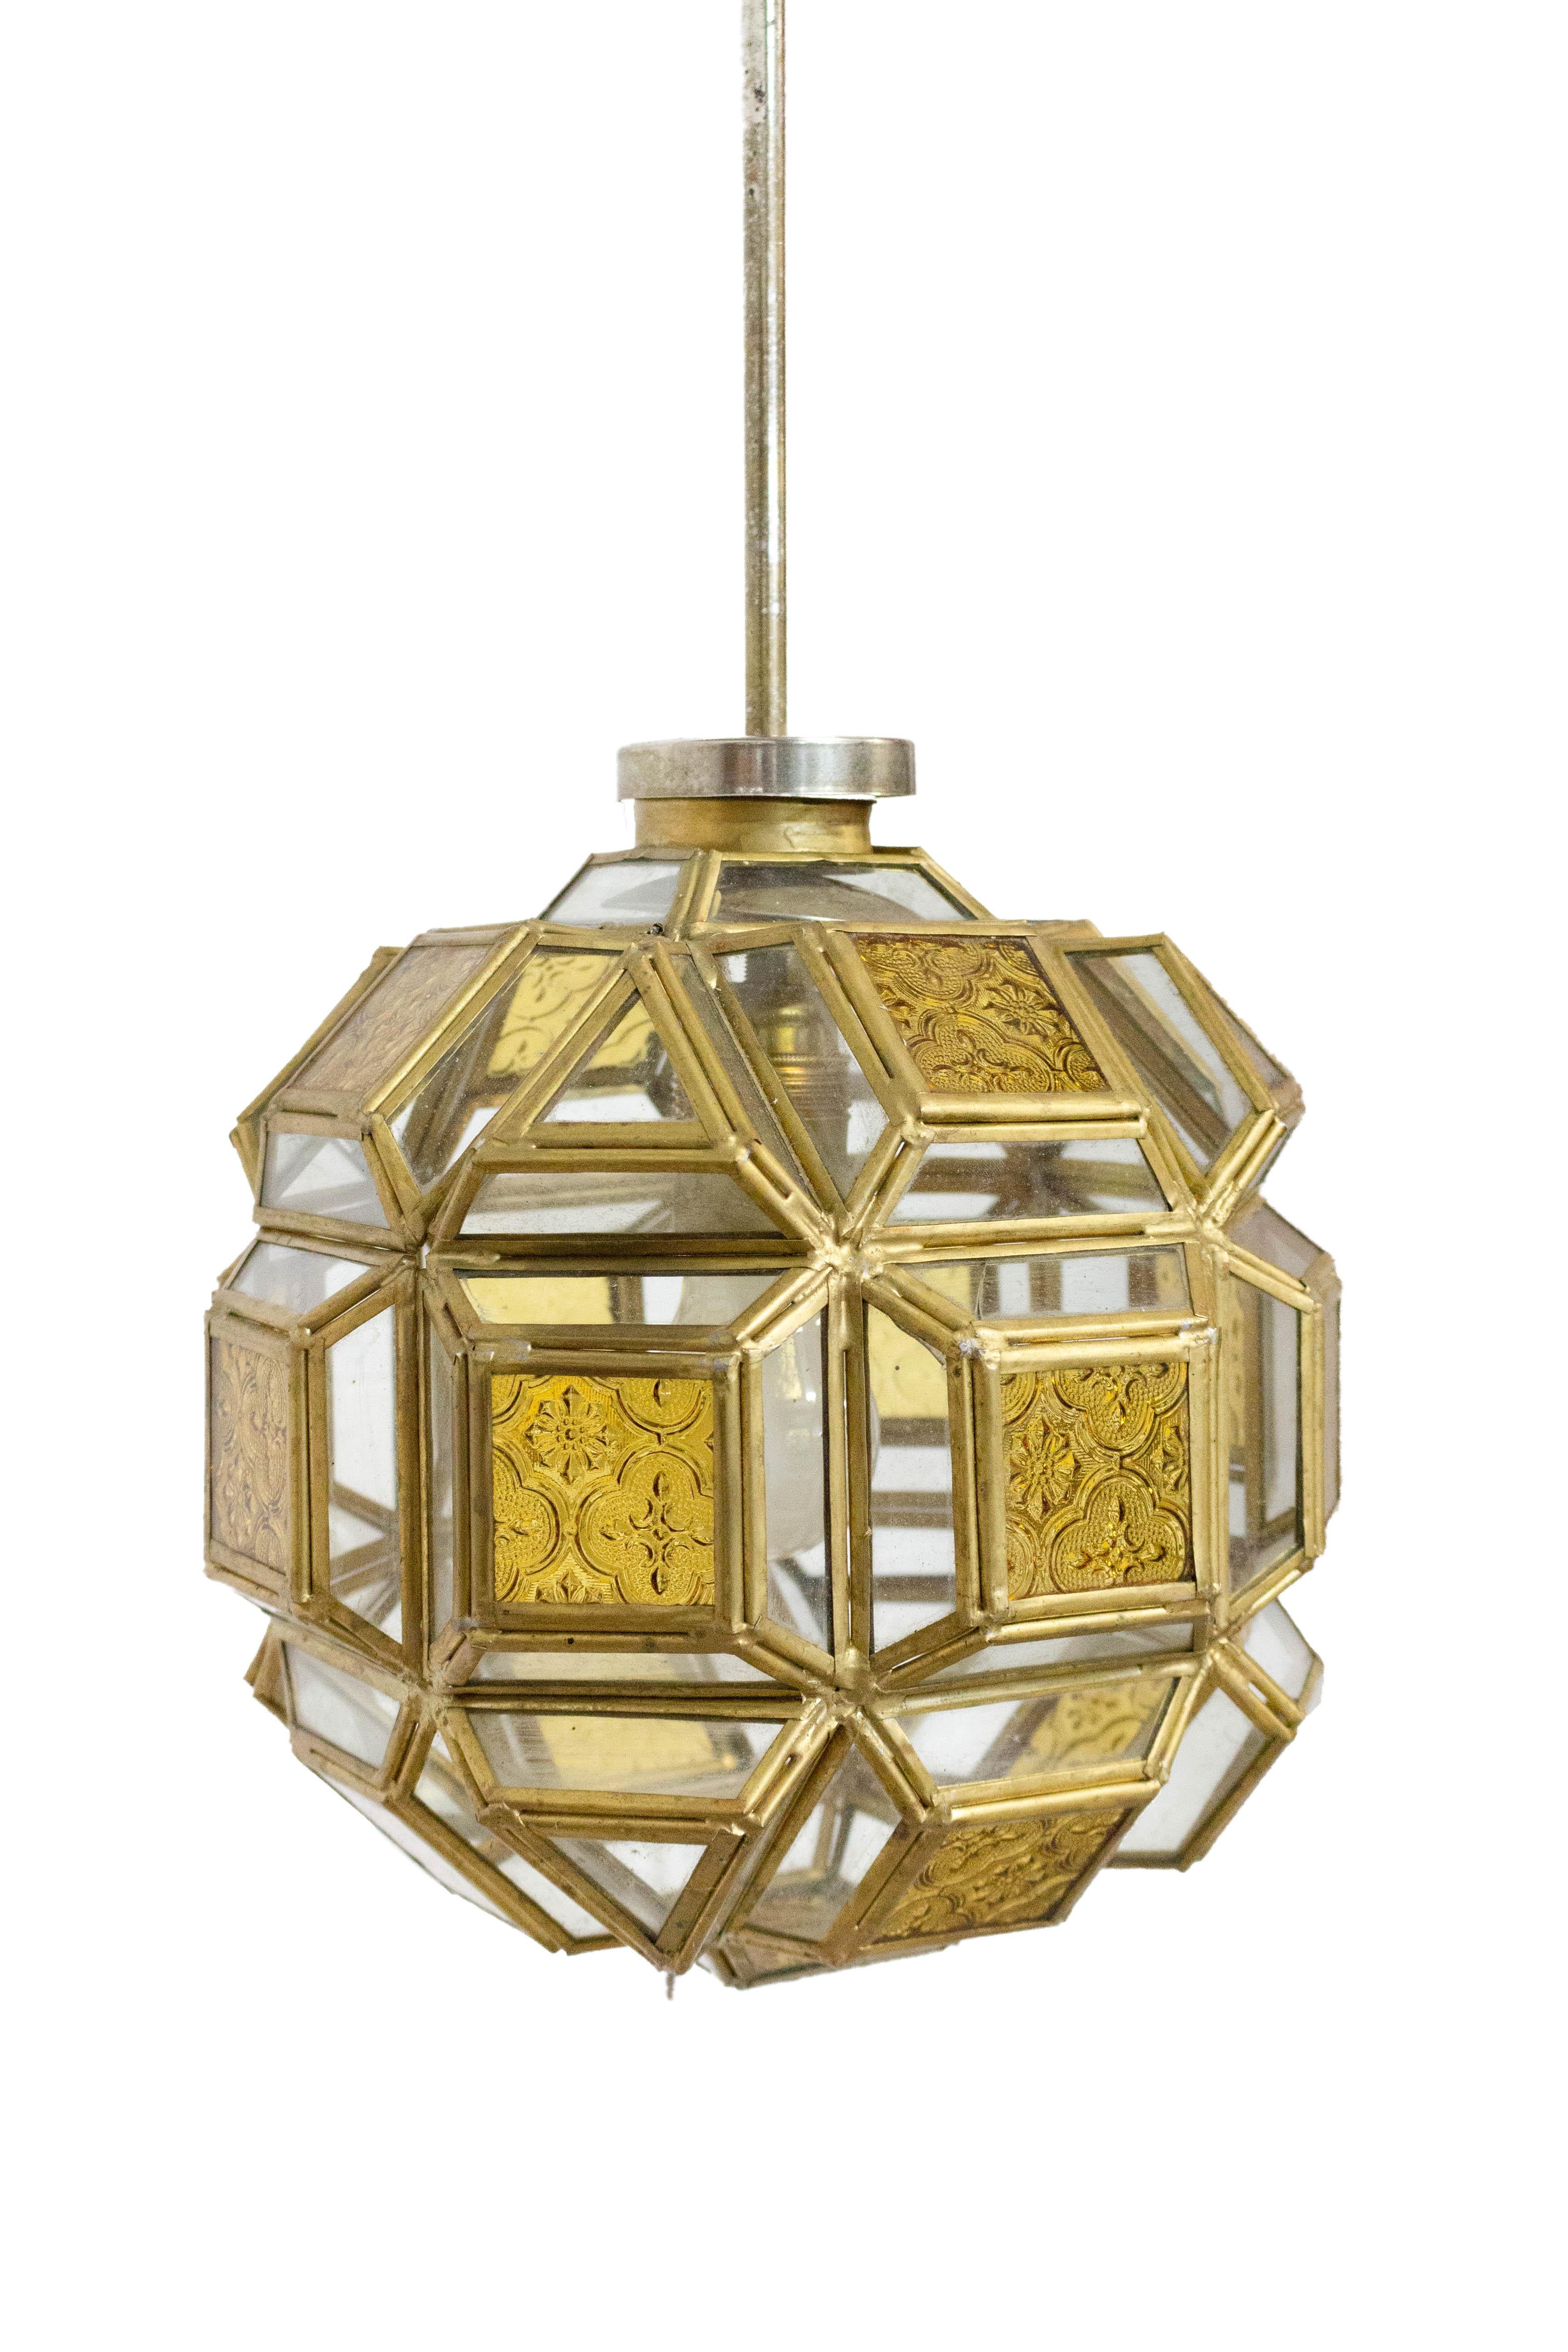 1960s glass pendant light chandelier, France
Orientalist style suspension with colored and transparent glass
This can be rewired to USA, UK and European standards
Good condition with three little facets fissured

Shipping:
H 48/24/24 cm 1.9 kg.